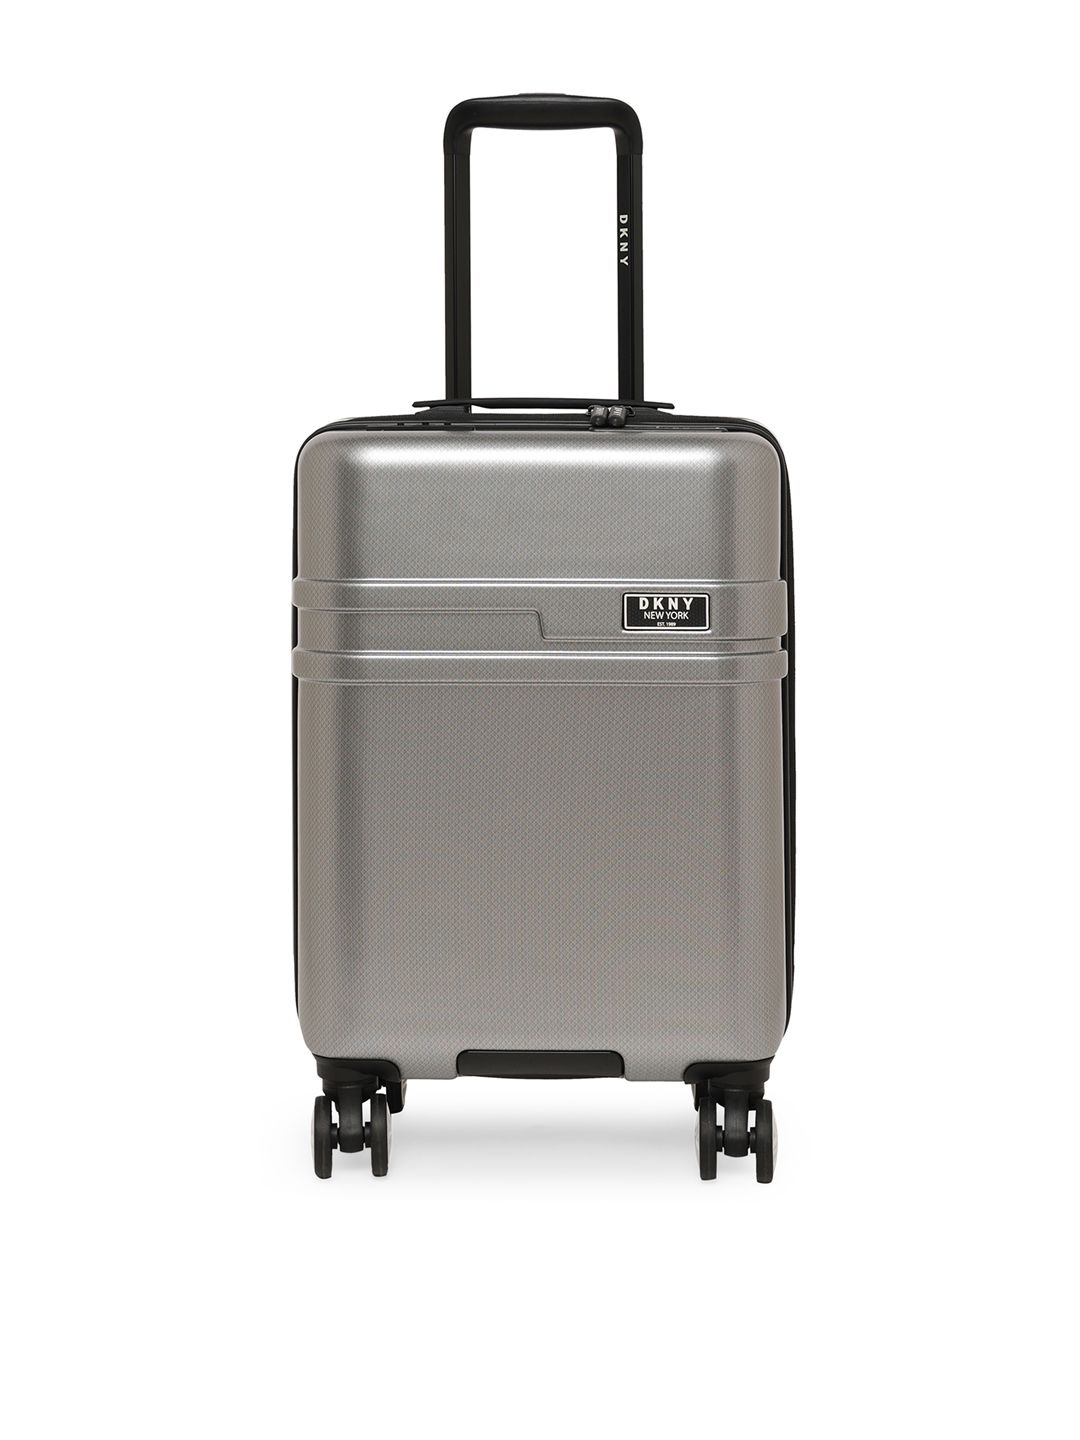 DKNY Silver-Toned Textured DASH Hard-Sided Cabin Trolley Suitcase Price in India